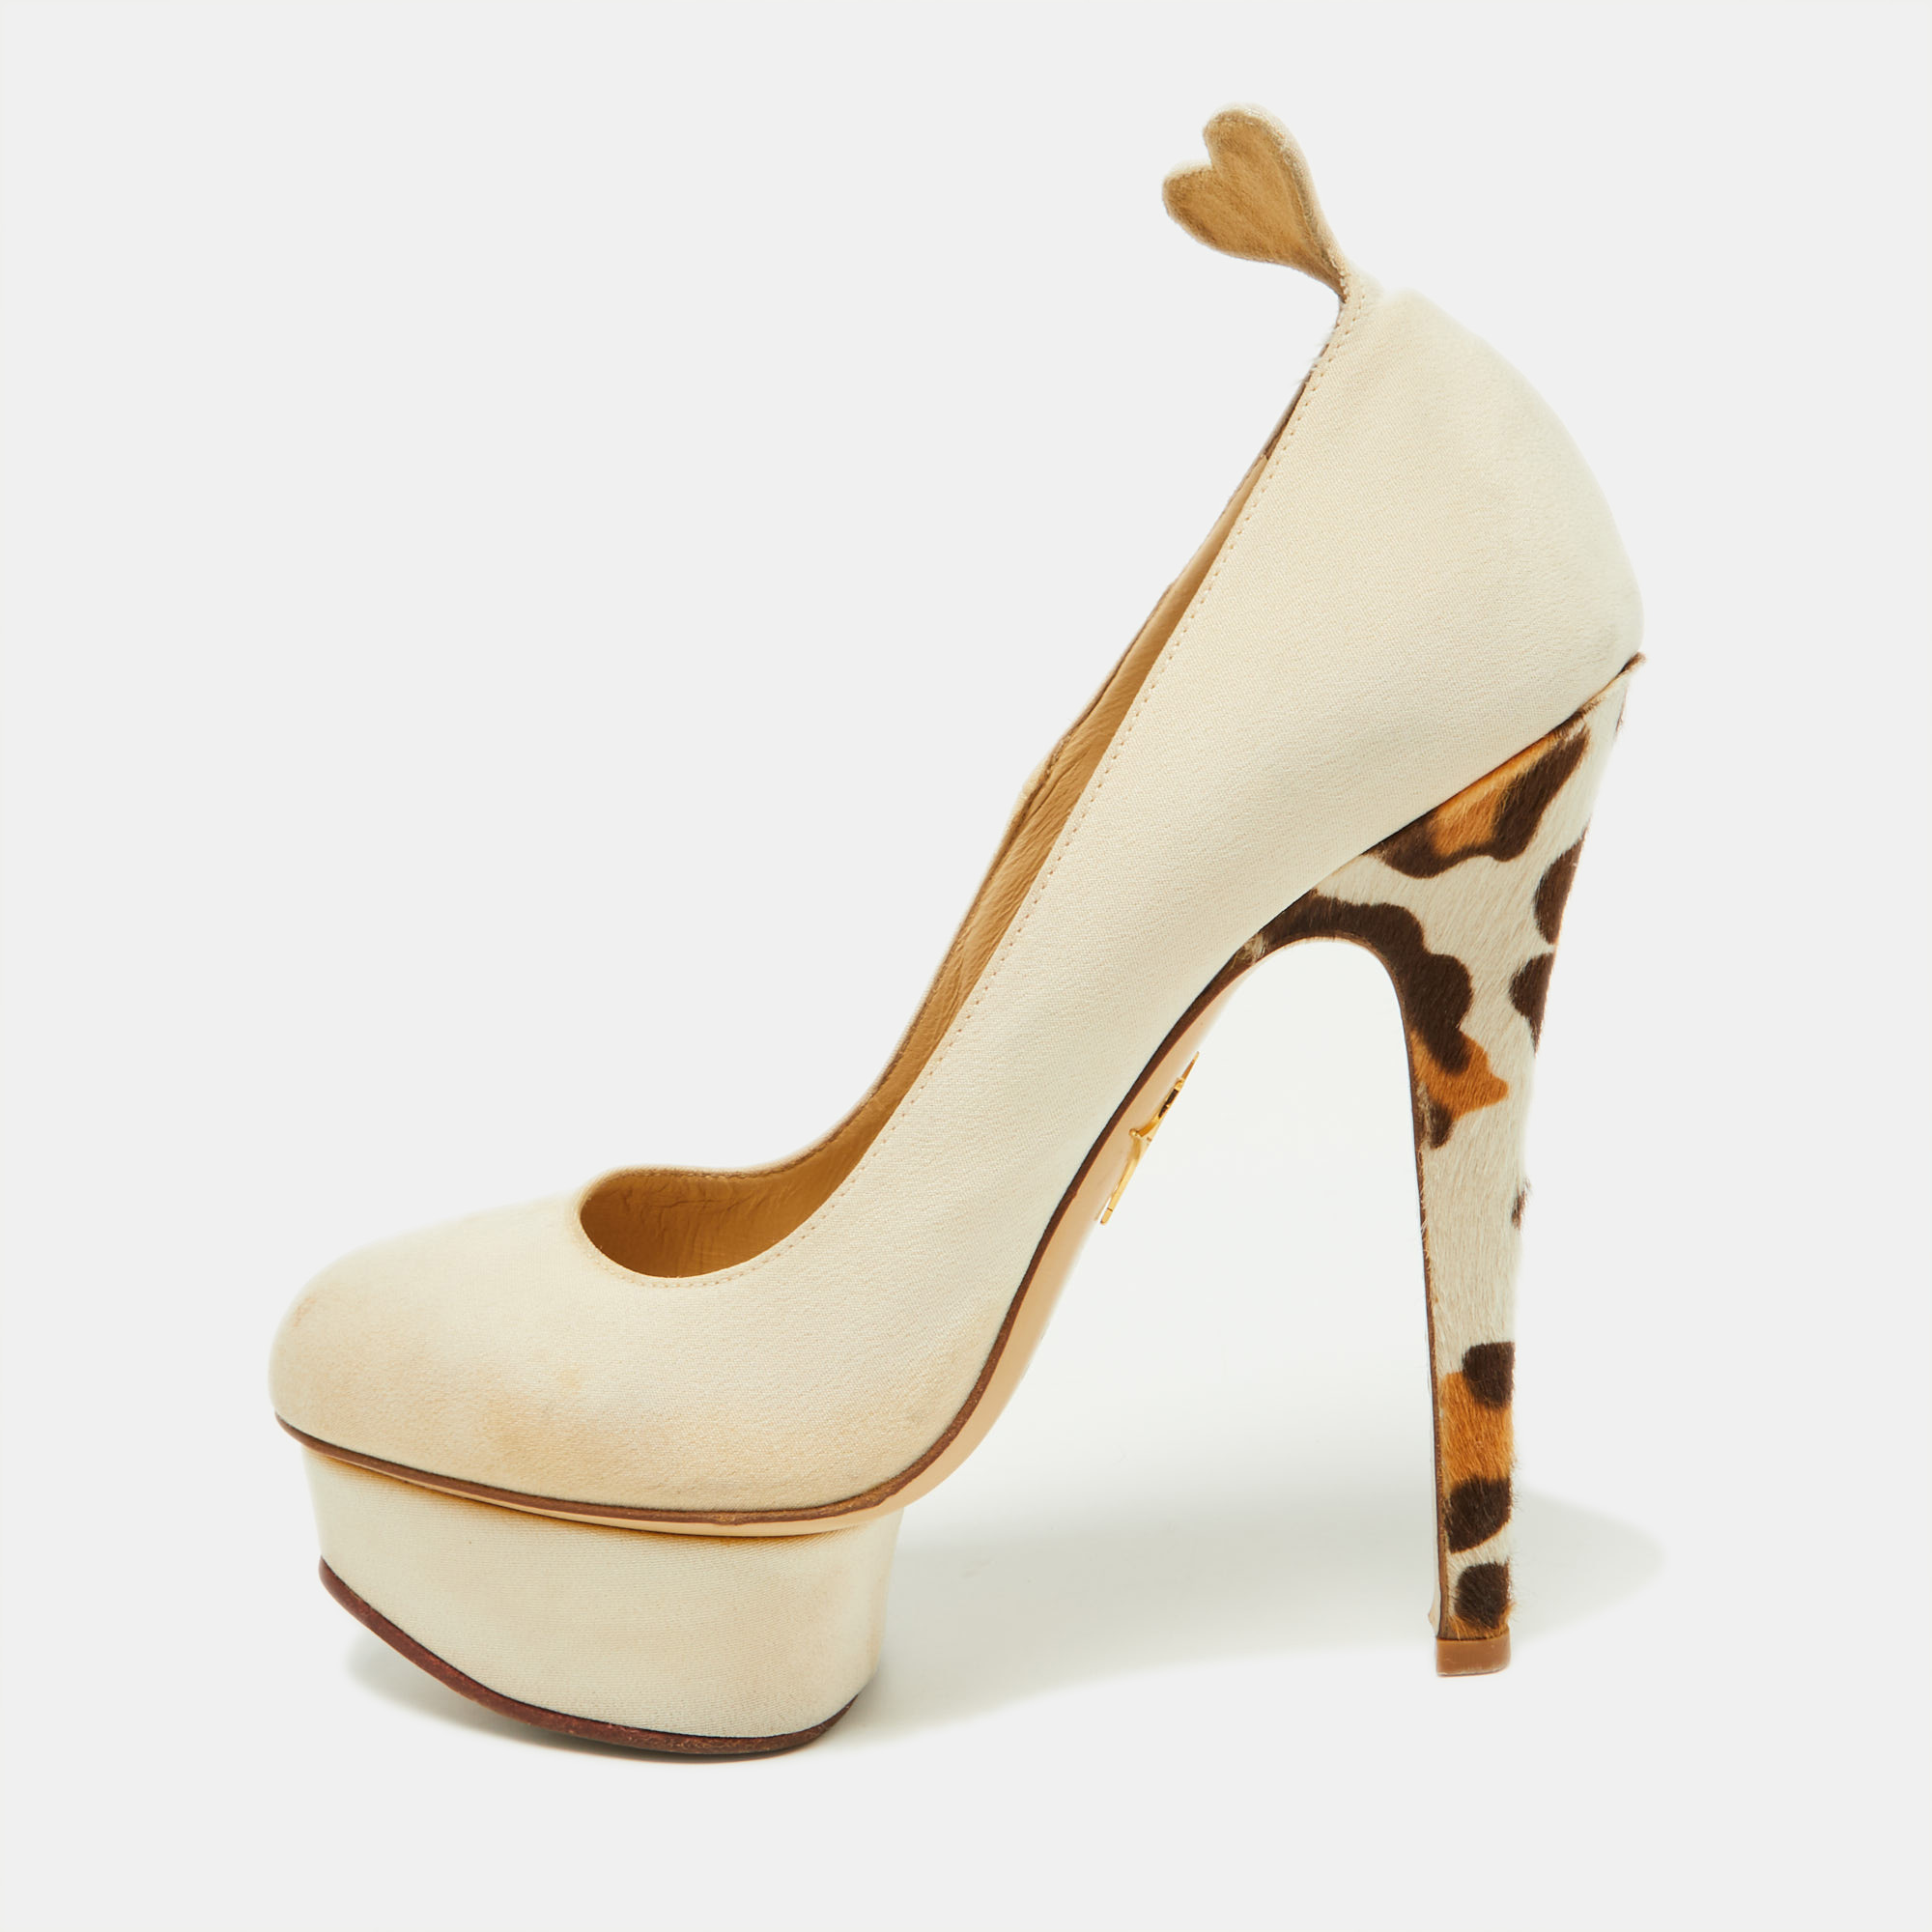 Pre-owned Charlotte Olympia Beige Fabric And Calfhair Dolly Platform Pumps Size 37.5